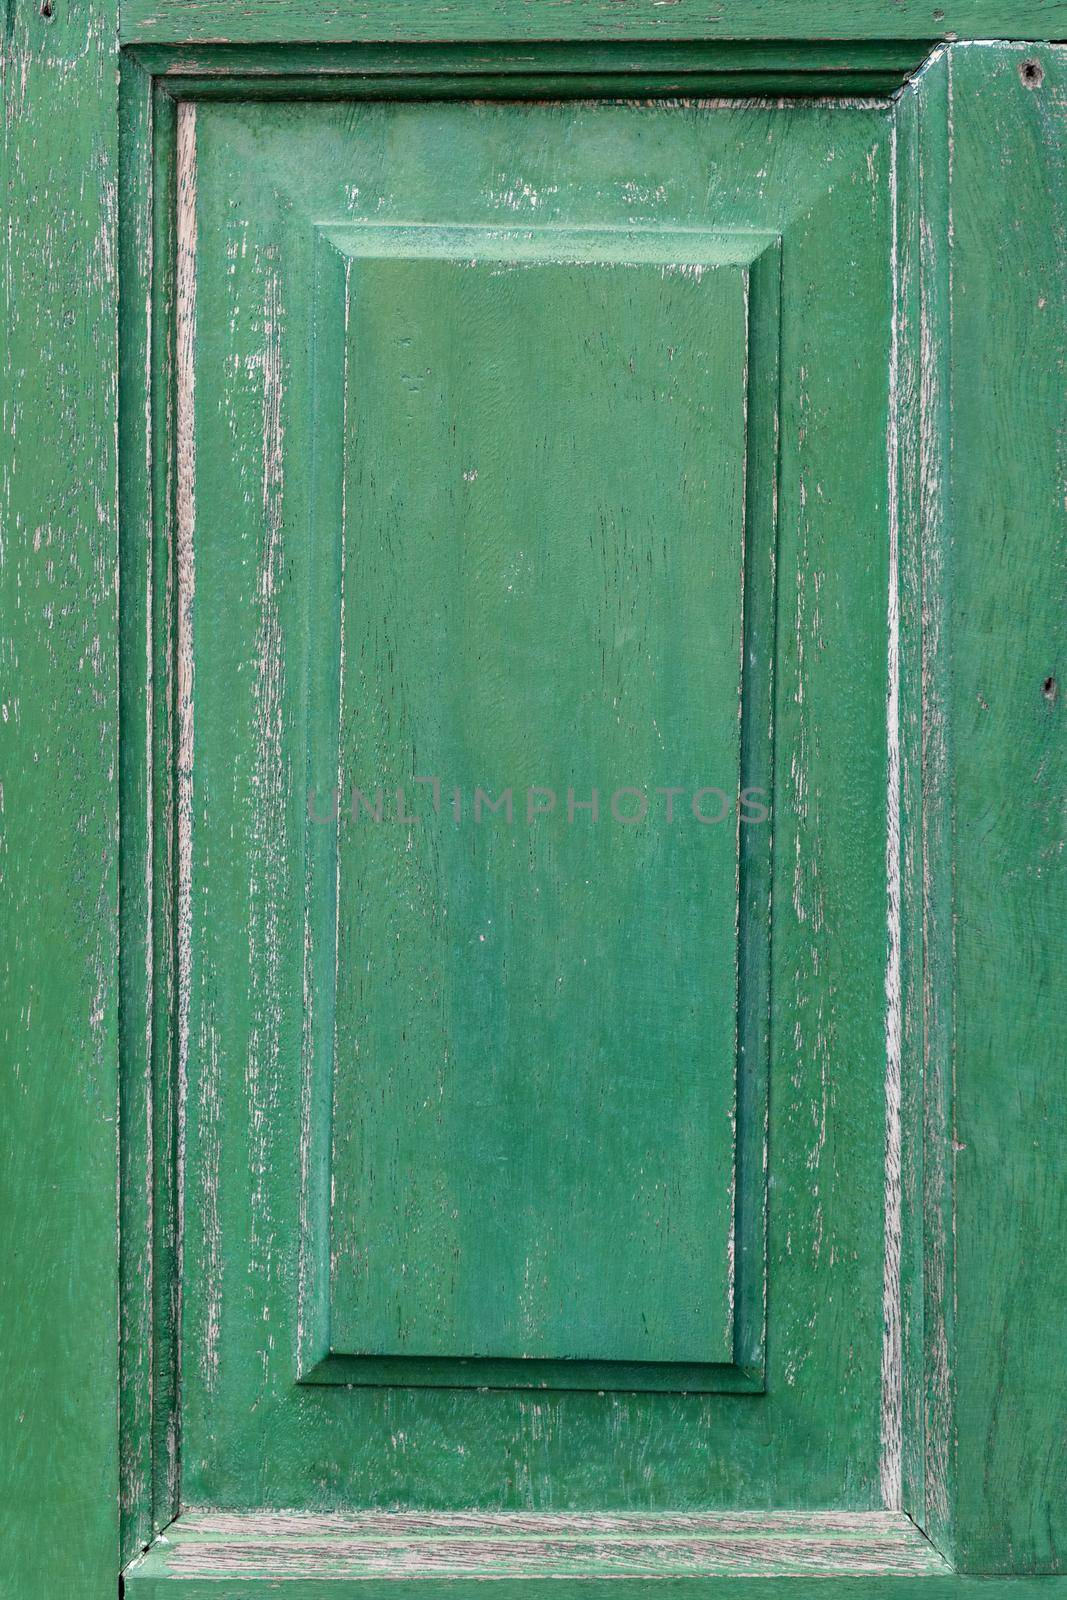 Frame part of a old wooden door painted on green.